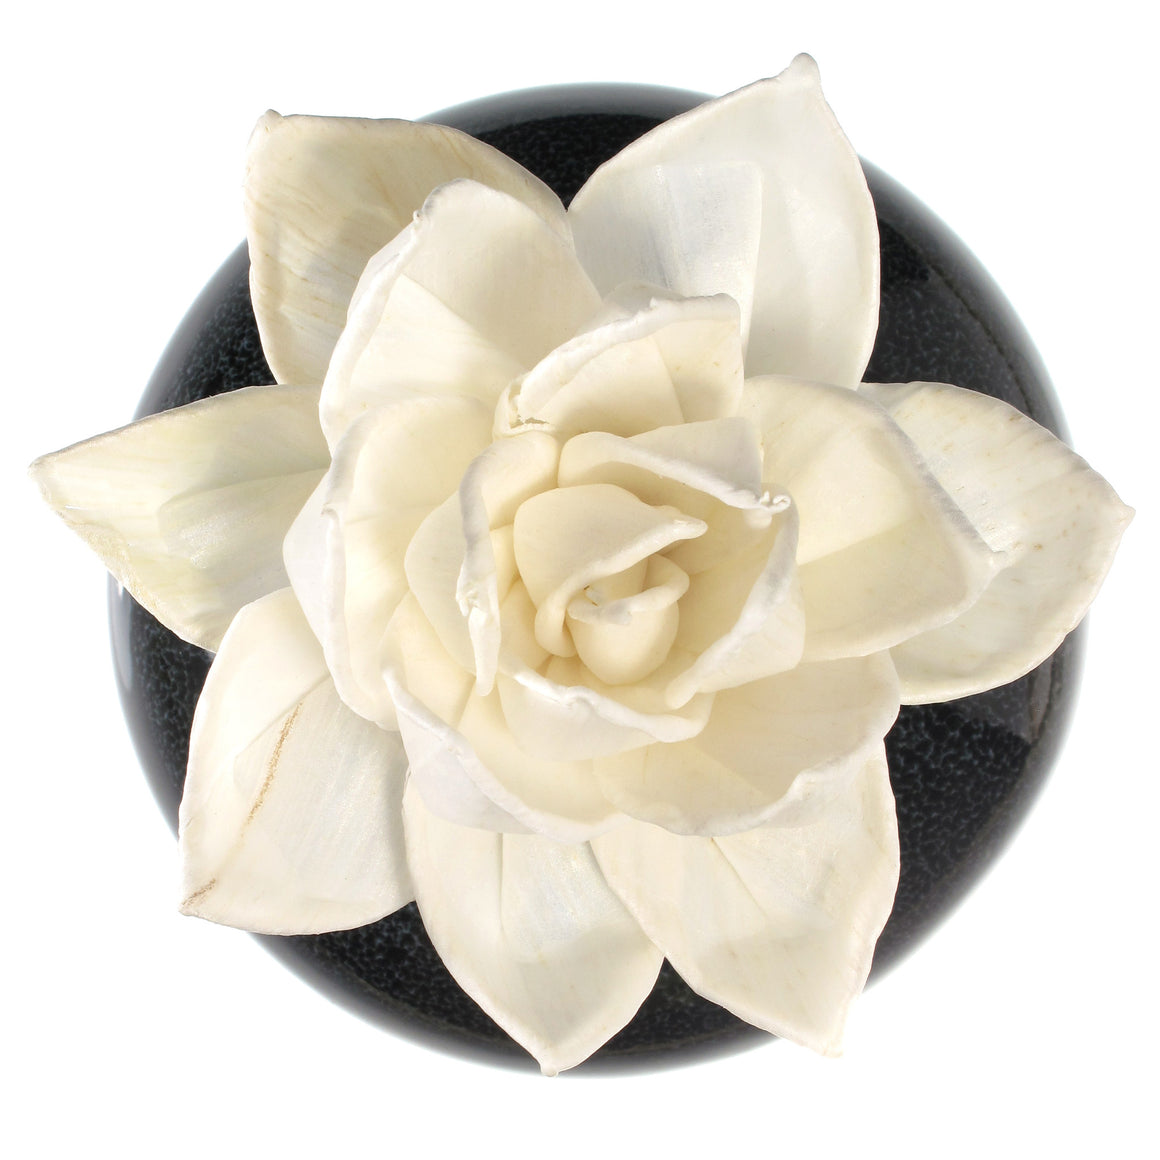 Sola Wood Flower Aroma Oil Diffuser with a Bendable Cotton Wire Wick, Lotus - TropicaZona